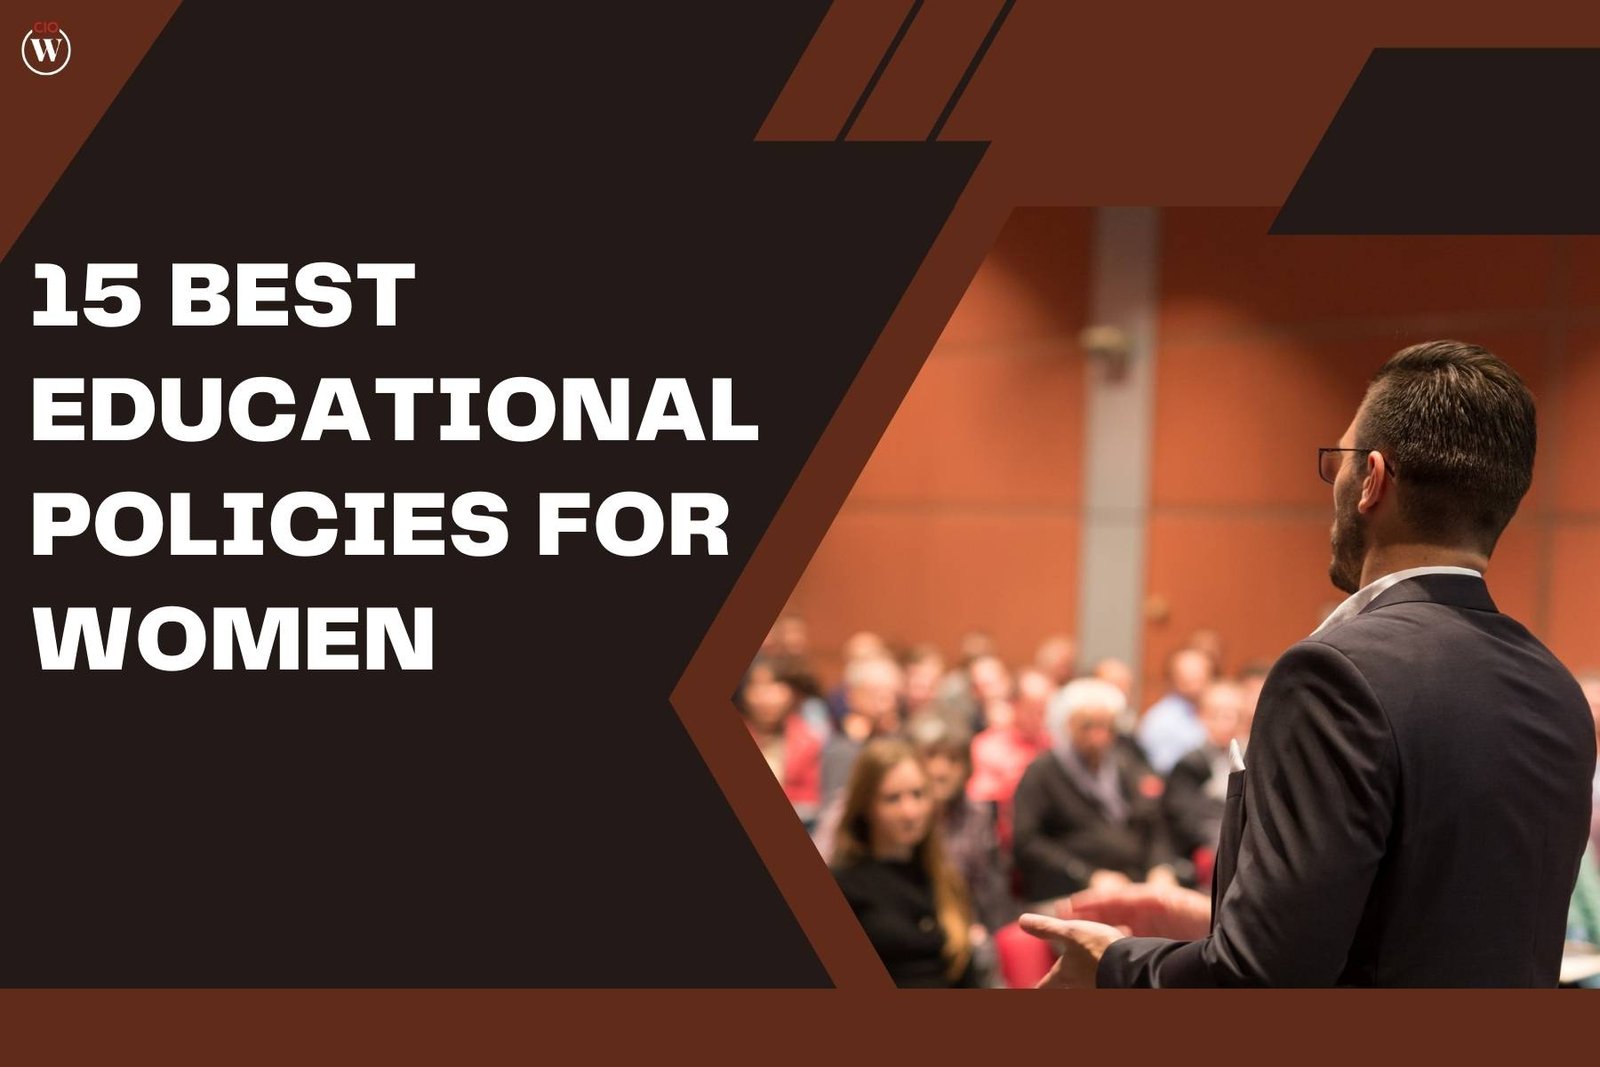 15 Best educational policies for women you should know